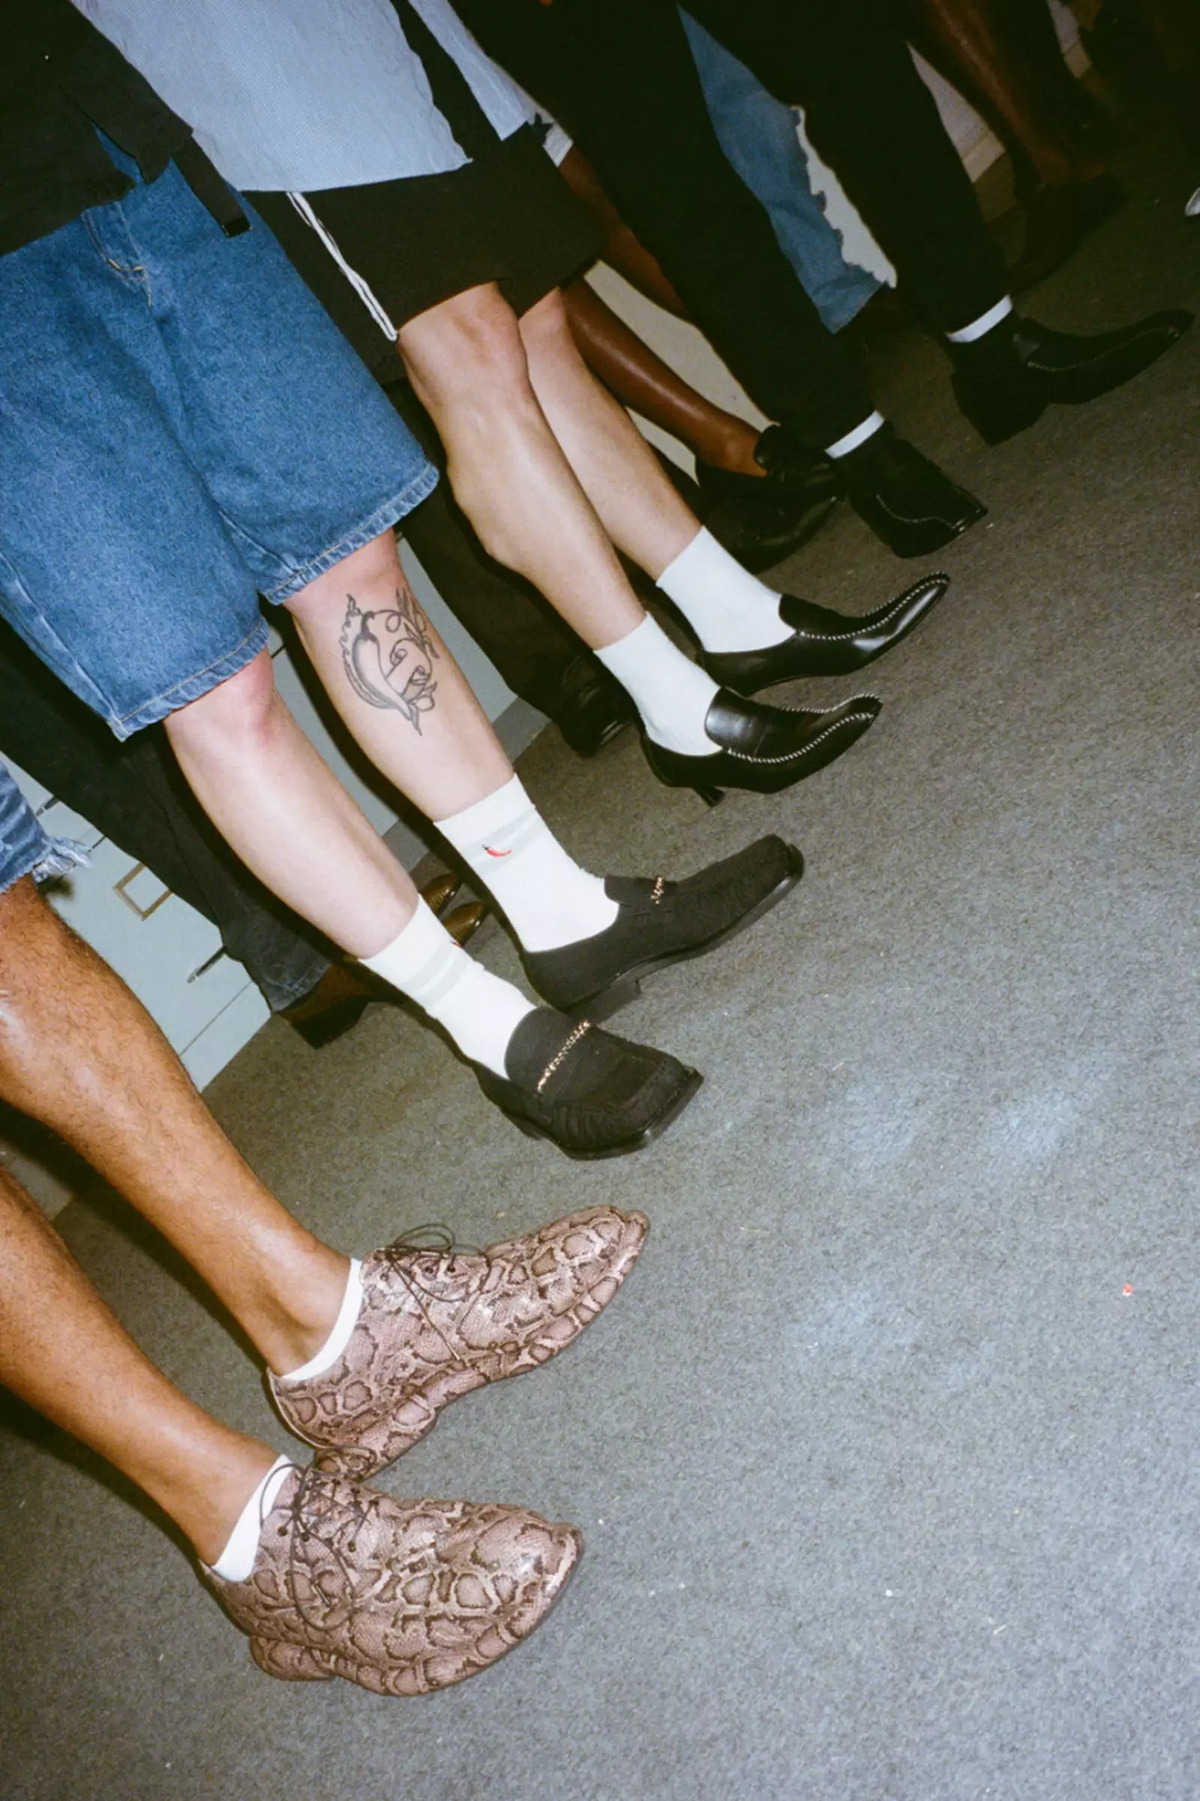 Martine Rose is Clarks' first guest creative director